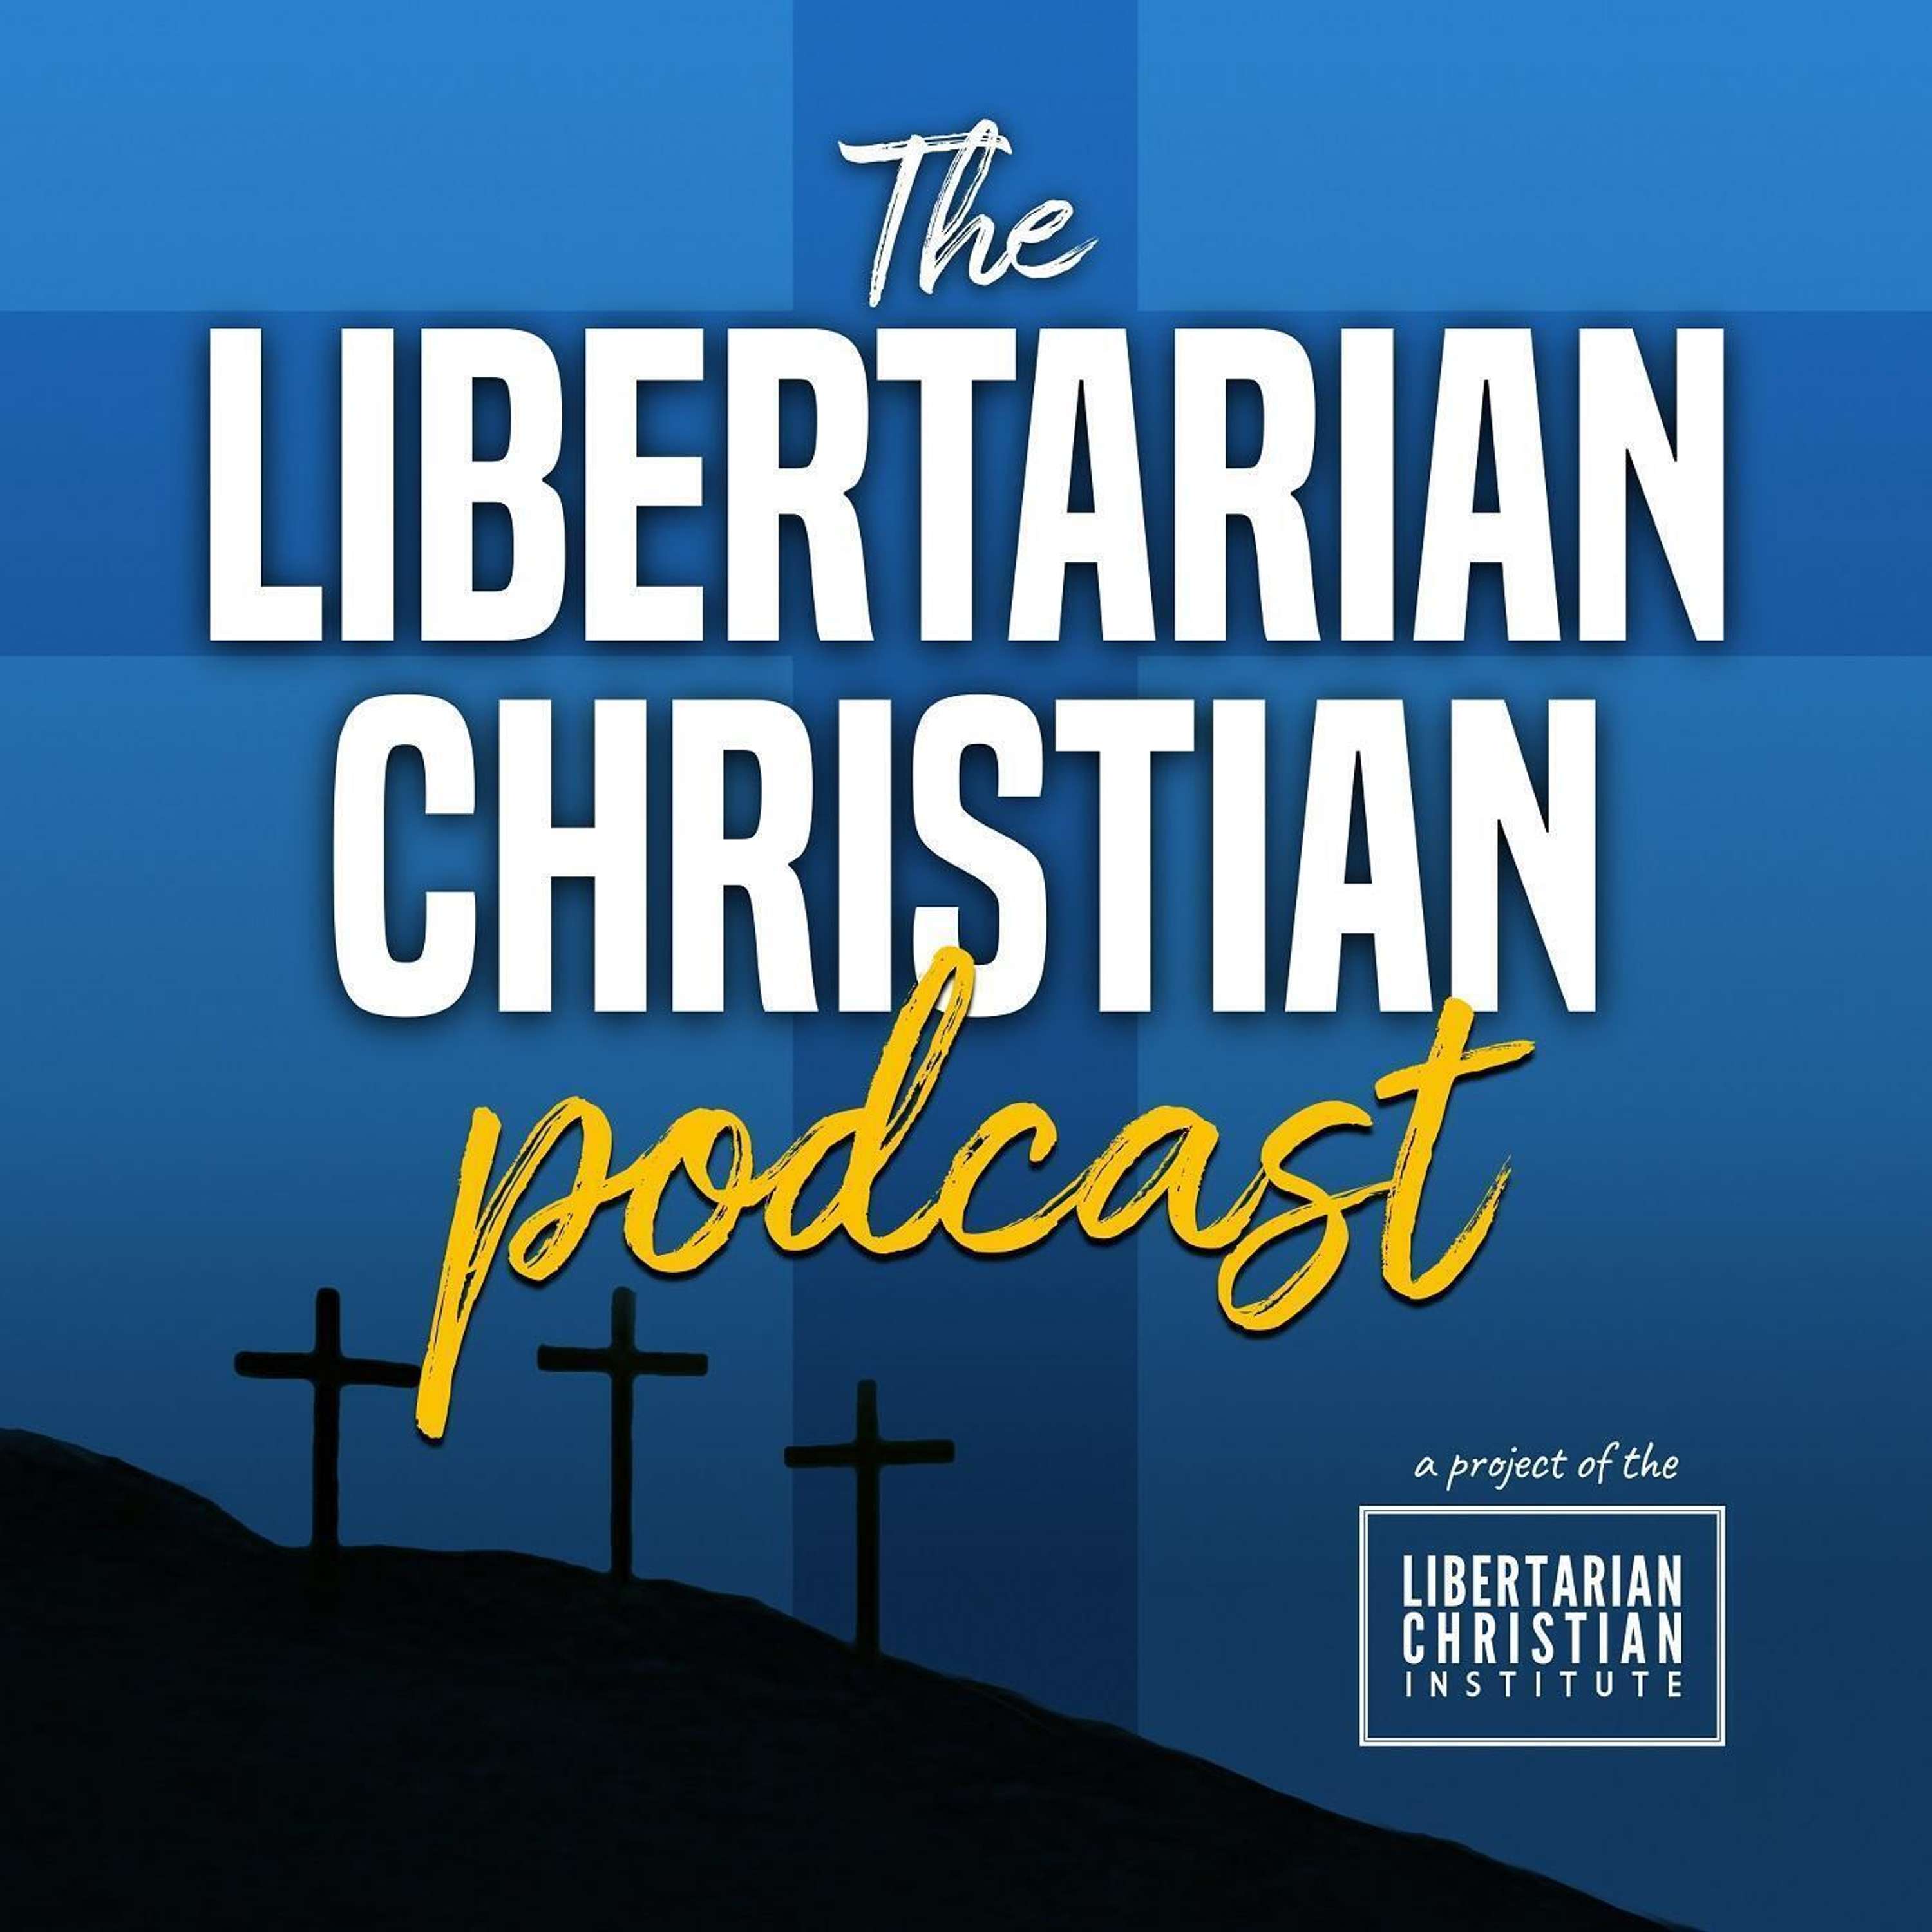 Re-Issue: Ep 15: Peter Enns on Biblical Interpretation, Trusting God, and a Life of Faith